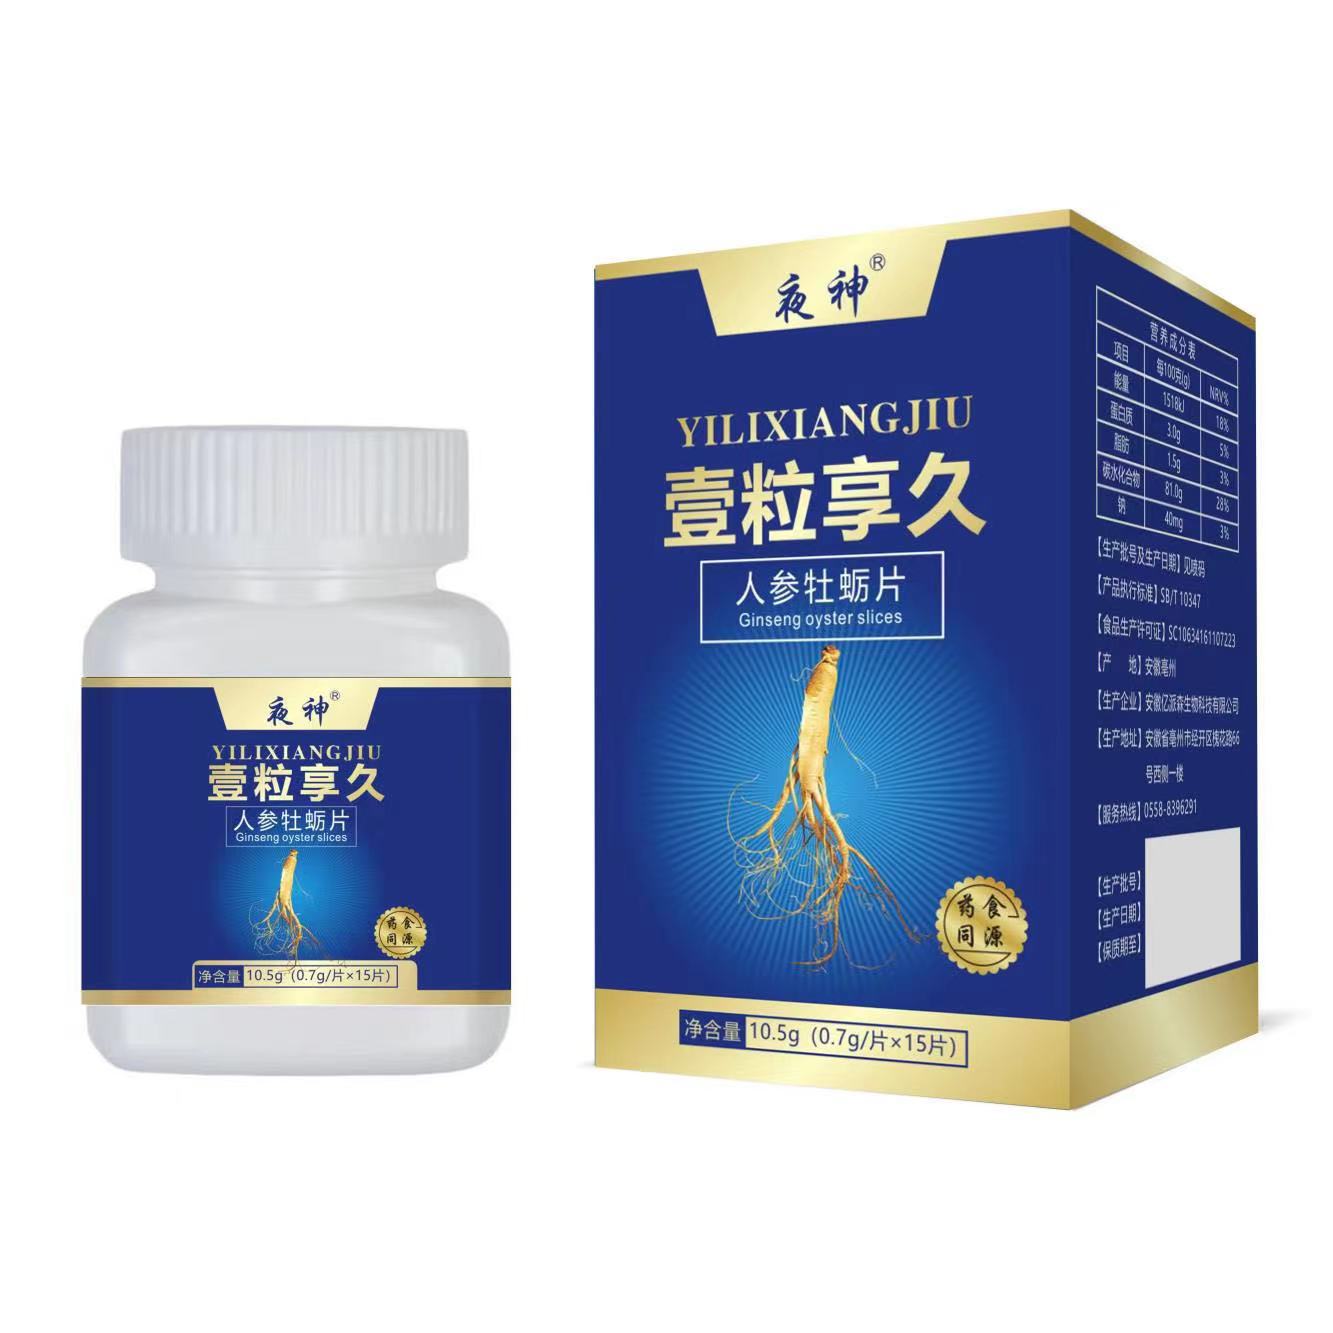 Ginseng Oyster Slices Oral health candy for men